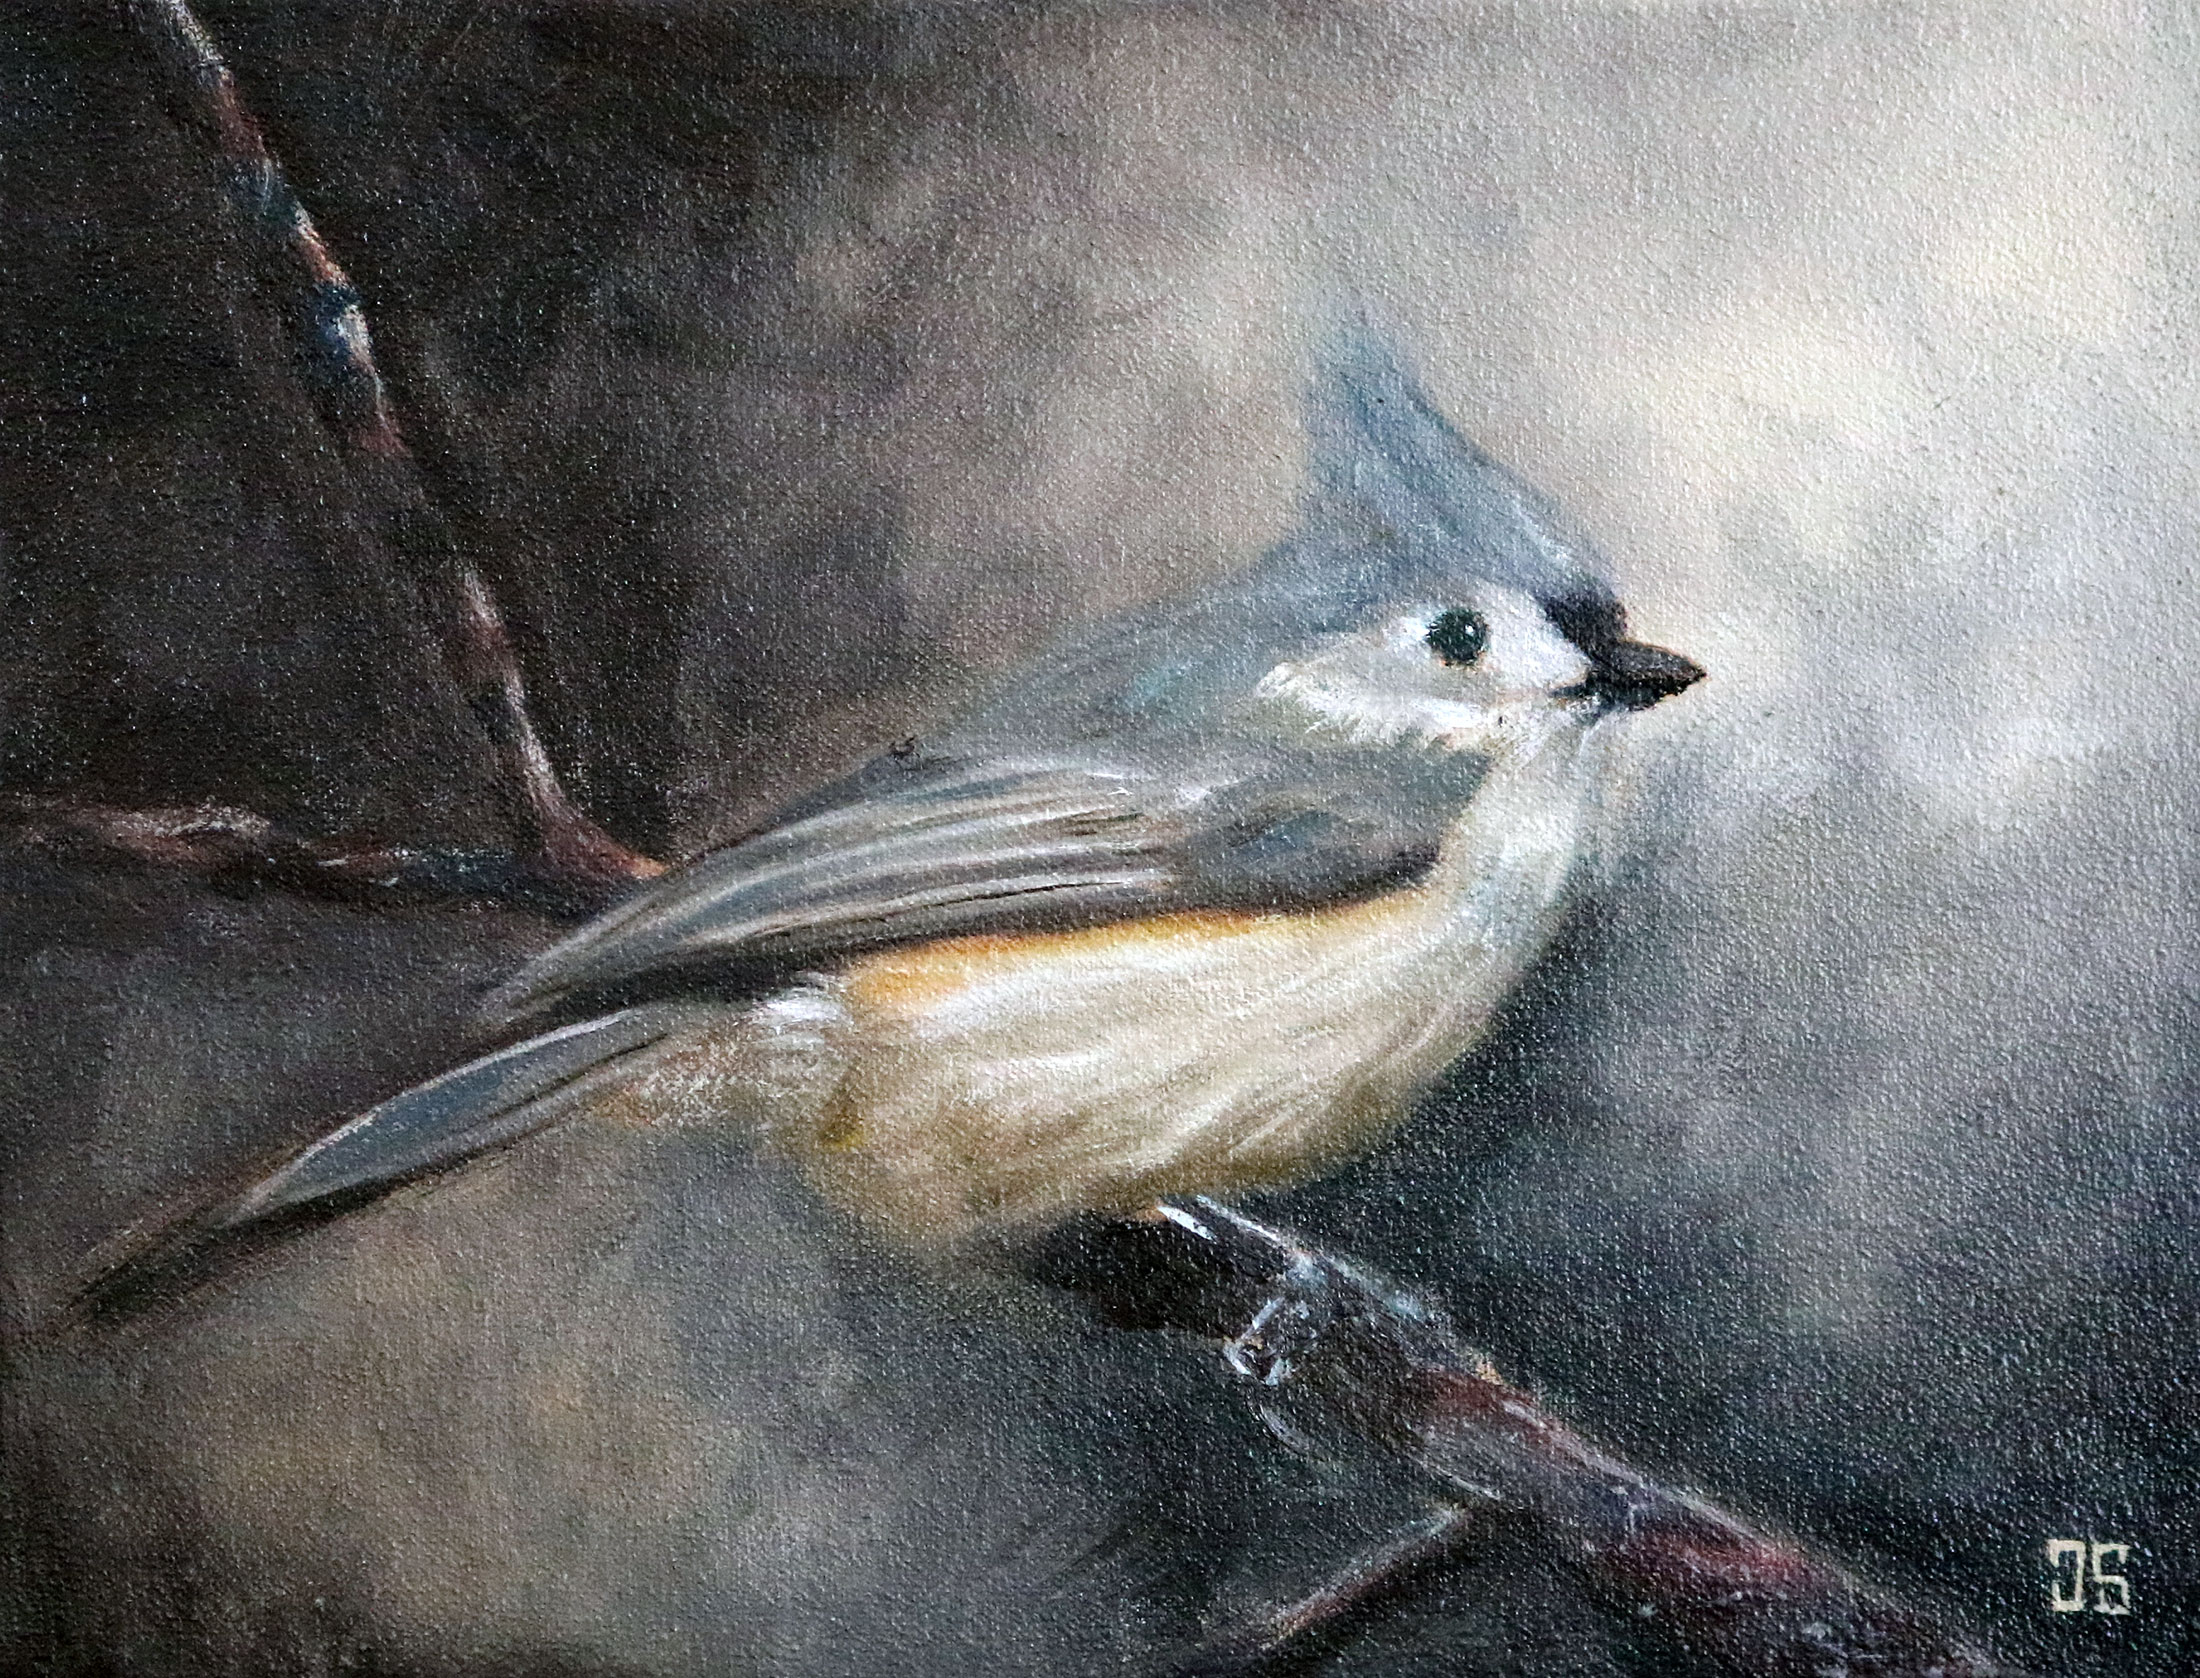 Oil painting "Birds of Cape Cod: Tufted Titmouse" by Jeffrey Dale Starr